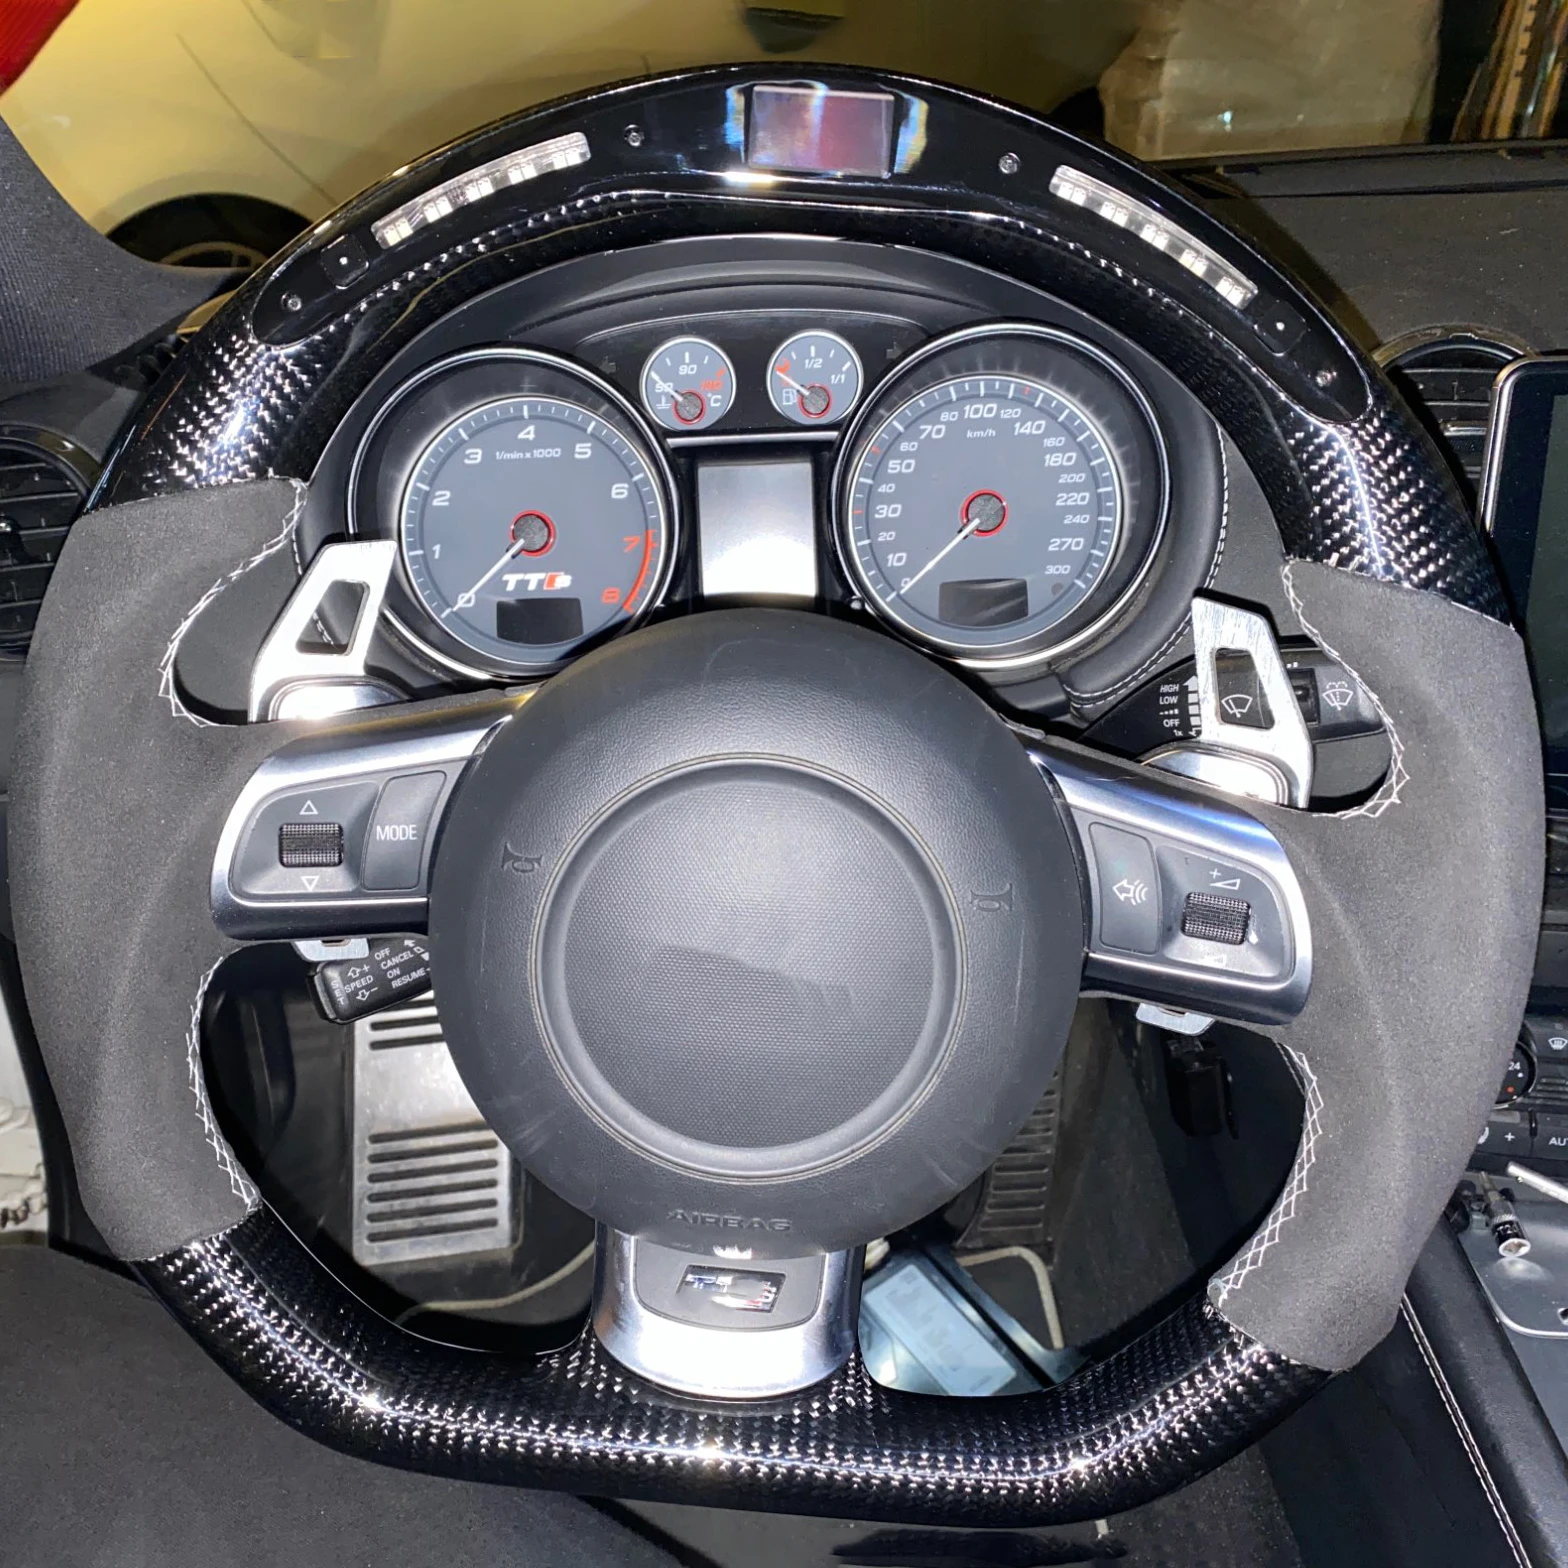 

100% Real Carbon Fiber LED Display Steering Wheel compatible for Aud-i TT R8 RS3 RS4 RS5 S3 S4 S5